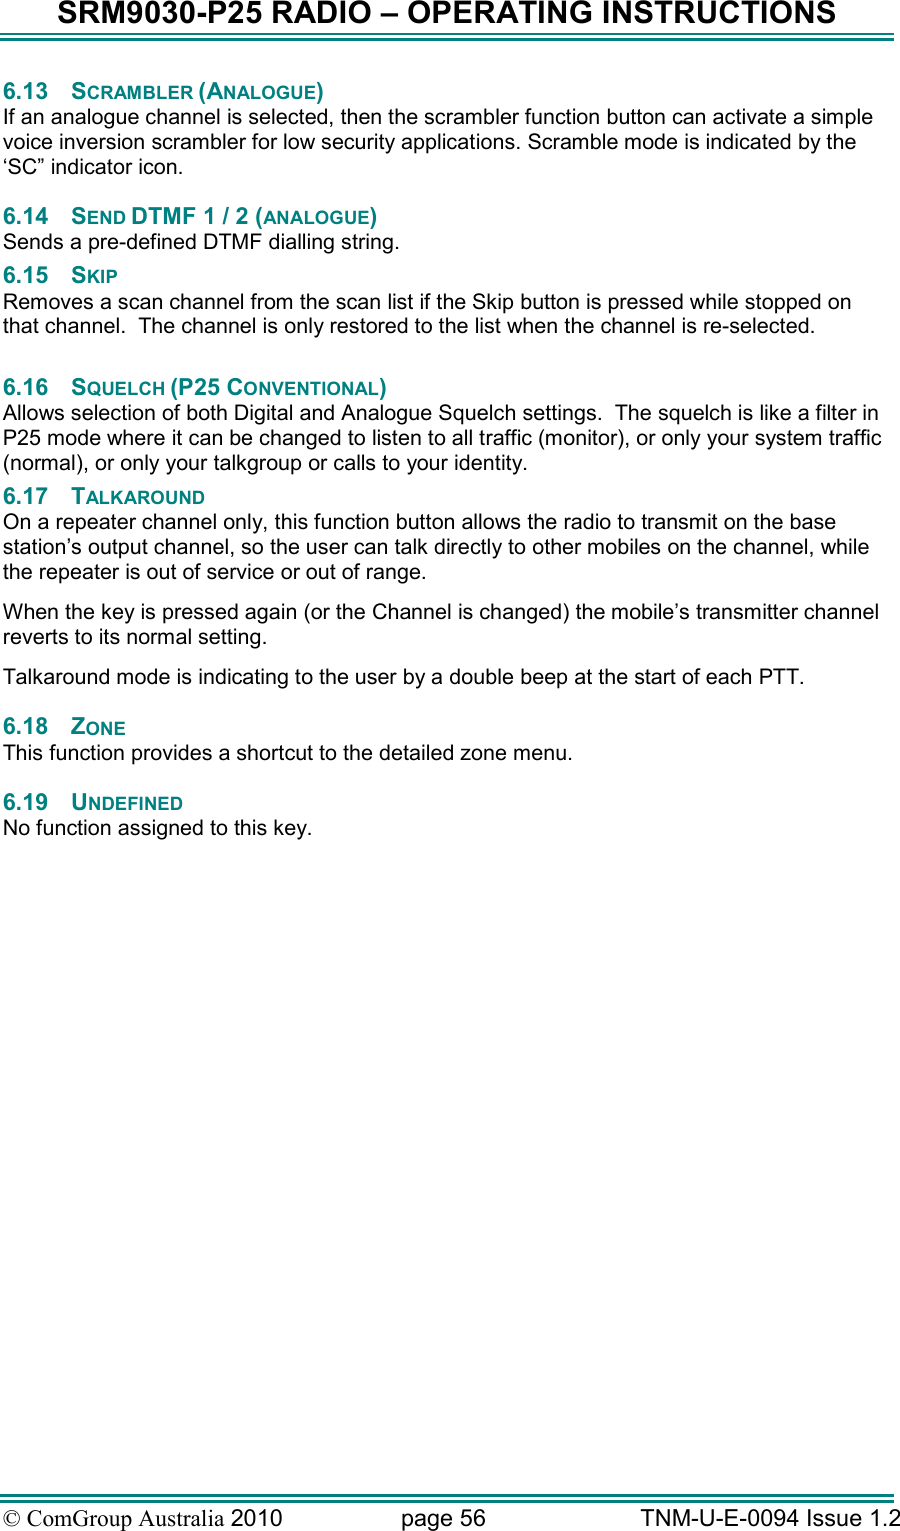 SRM9030-P25 RADIO – OPERATING INSTRUCTIONS © ComGroup Australia 2010  page 56   TNM-U-E-0094 Issue 1.2 6.13  SCRAMBLER (ANALOGUE) If an analogue channel is selected, then the scrambler function button can activate a simple voice inversion scrambler for low security applications. Scramble mode is indicated by the ‘SC” indicator icon. 6.14  SEND DTMF 1 / 2 (ANALOGUE) Sends a pre-defined DTMF dialling string. 6.15  SKIP Removes a scan channel from the scan list if the Skip button is pressed while stopped on that channel.  The channel is only restored to the list when the channel is re-selected.  6.16  SQUELCH (P25 CONVENTIONAL) Allows selection of both Digital and Analogue Squelch settings.  The squelch is like a filter in P25 mode where it can be changed to listen to all traffic (monitor), or only your system traffic (normal), or only your talkgroup or calls to your identity.  6.17  TALKAROUND On a repeater channel only, this function button allows the radio to transmit on the base station’s output channel, so the user can talk directly to other mobiles on the channel, while the repeater is out of service or out of range. When the key is pressed again (or the Channel is changed) the mobile’s transmitter channel reverts to its normal setting. Talkaround mode is indicating to the user by a double beep at the start of each PTT. 6.18  ZONE This function provides a shortcut to the detailed zone menu. 6.19  UNDEFINED  No function assigned to this key.   